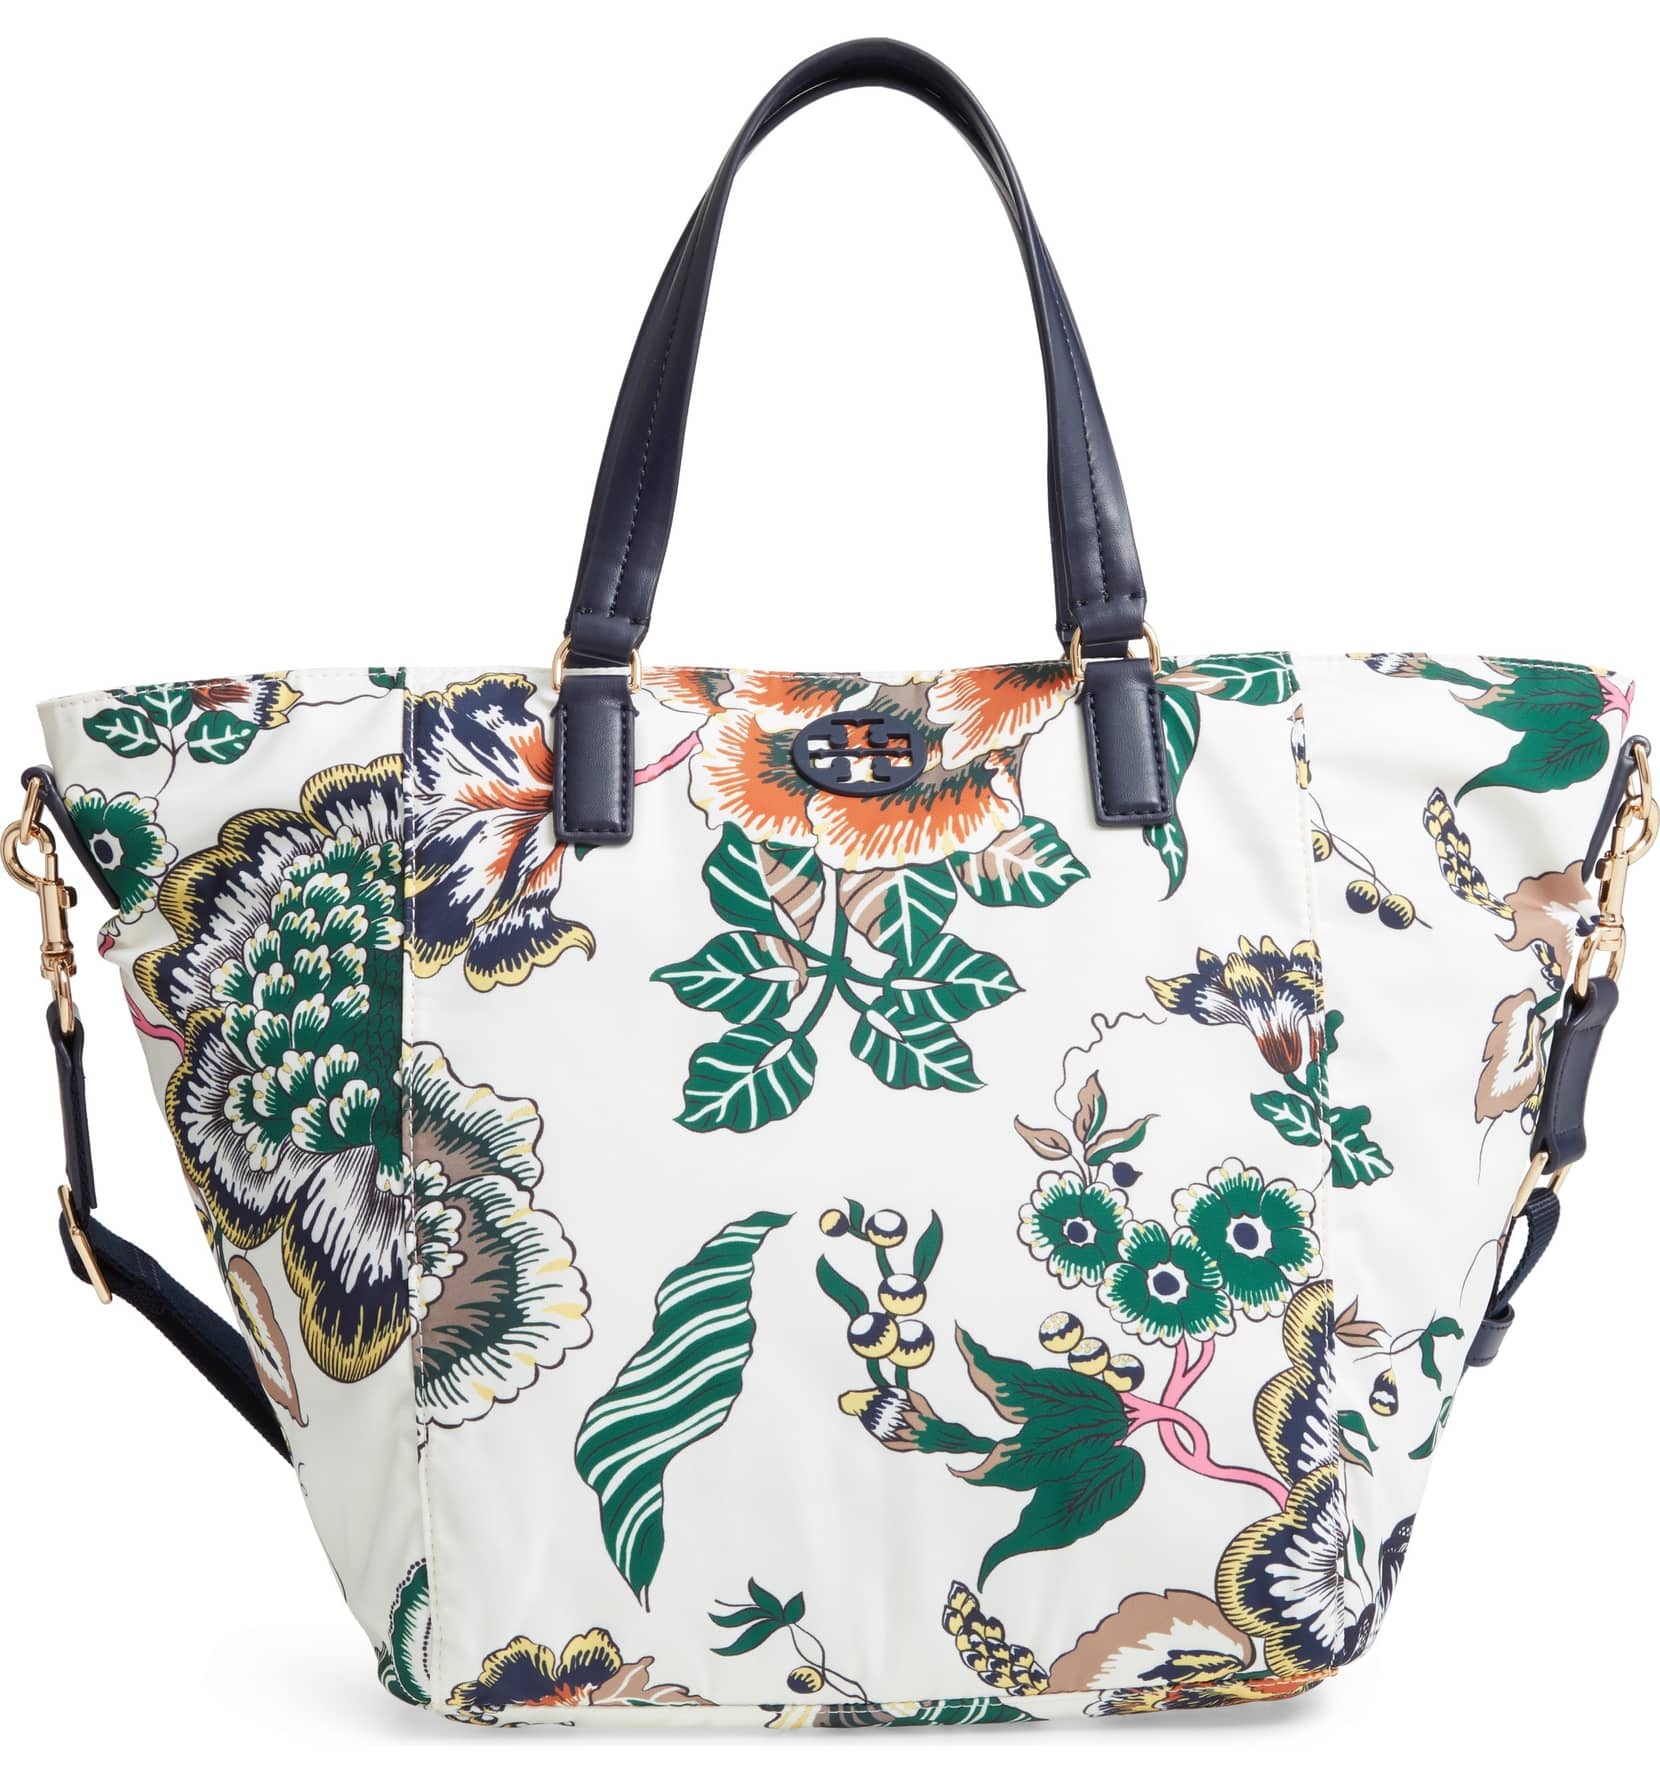 Tory Burch Tilda Printed Nylon Small Tote | Victoria Beckham's Vacation  Look Will Make You Want to Do Summer All Over Again | POPSUGAR Fashion  Photo 21